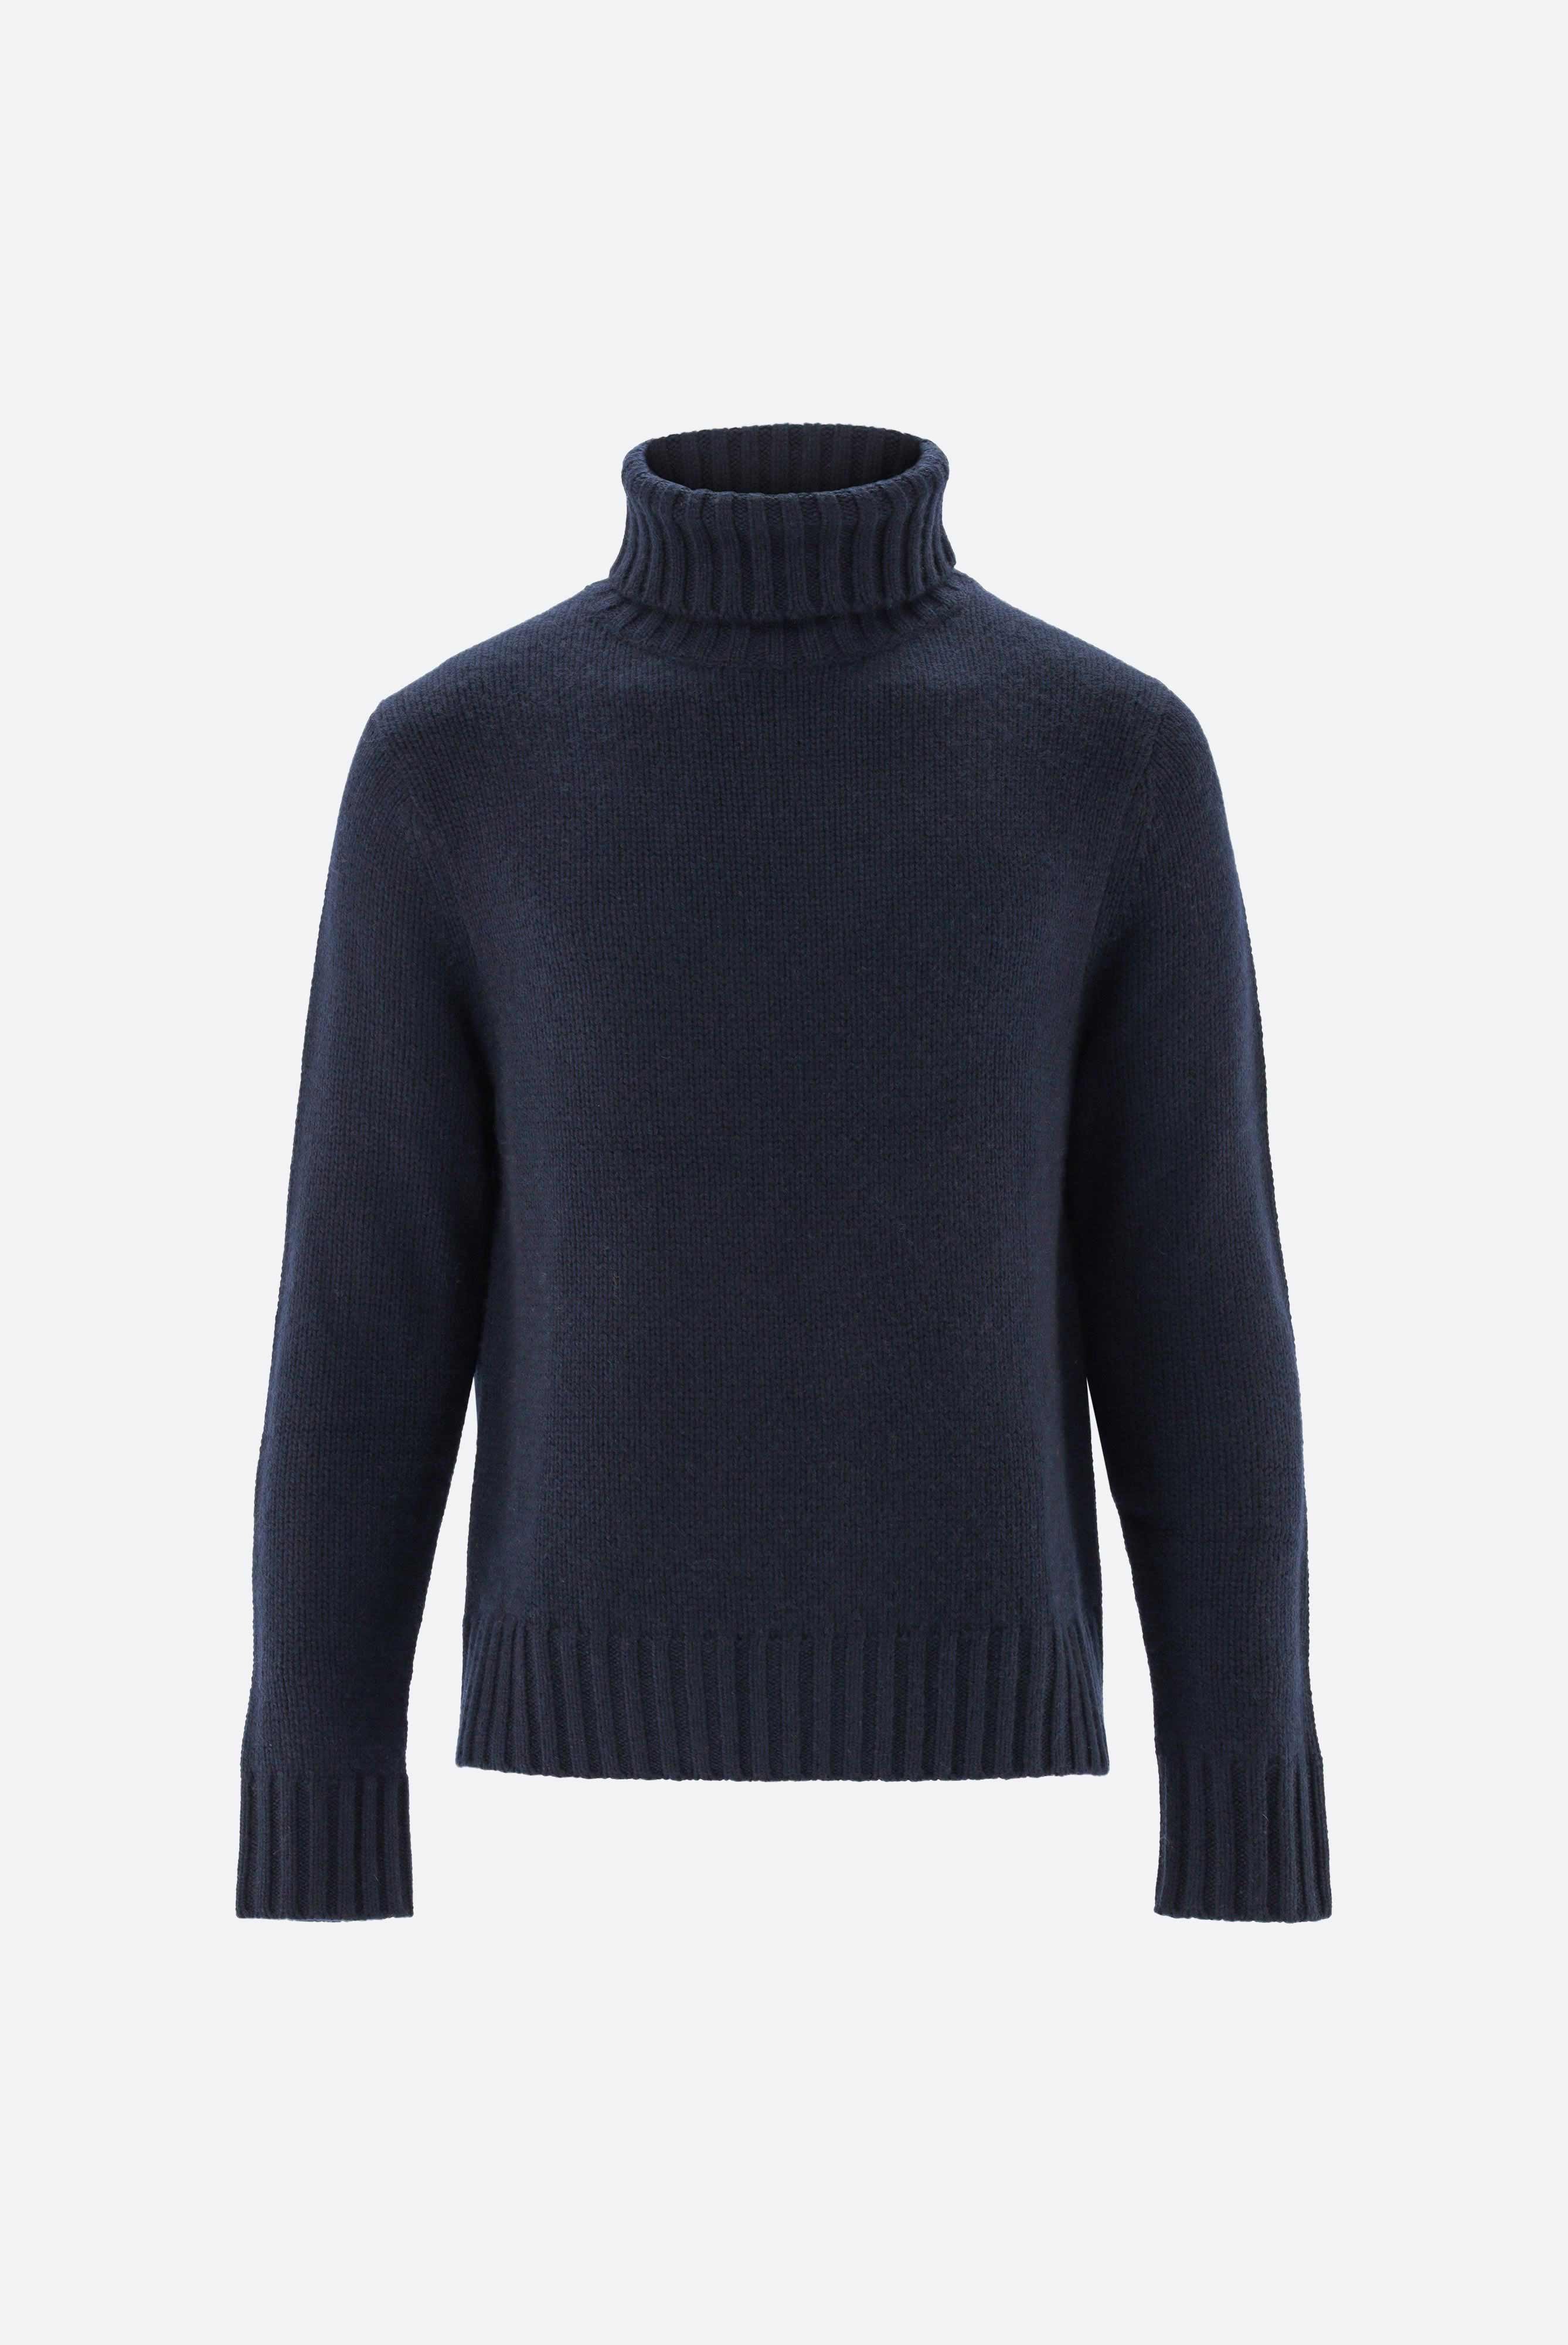 Sweaters & Cardigans+Turtleneck Cashmere Sweater+82.8640..S00235.790.M